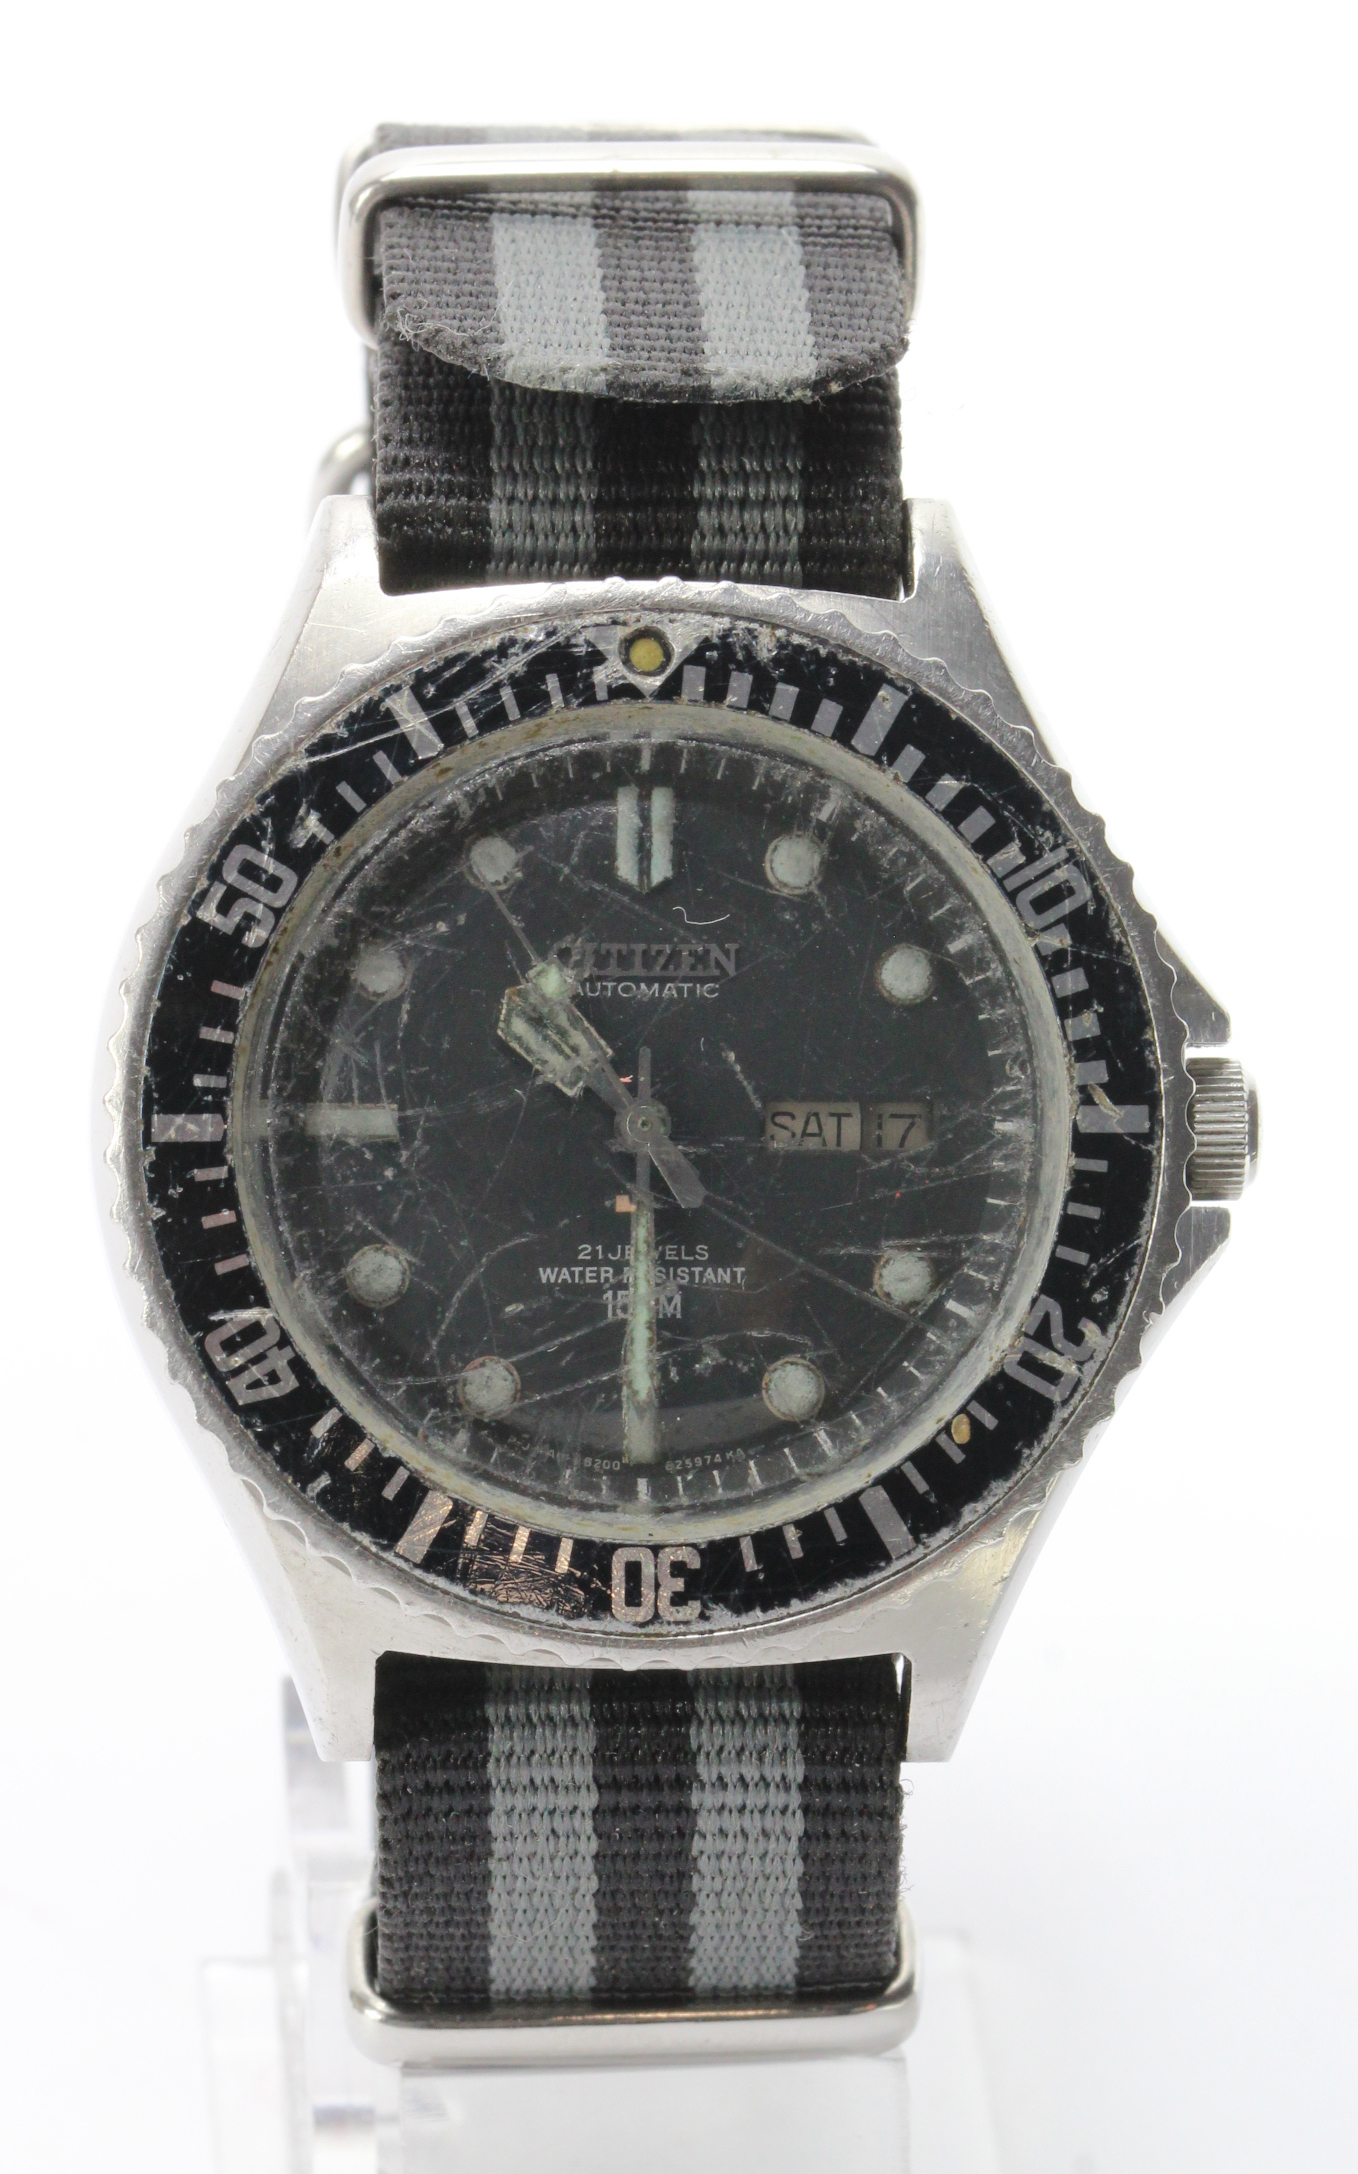 Gents stainless steel cased Citizen automatic divers watch. Working when catalogued